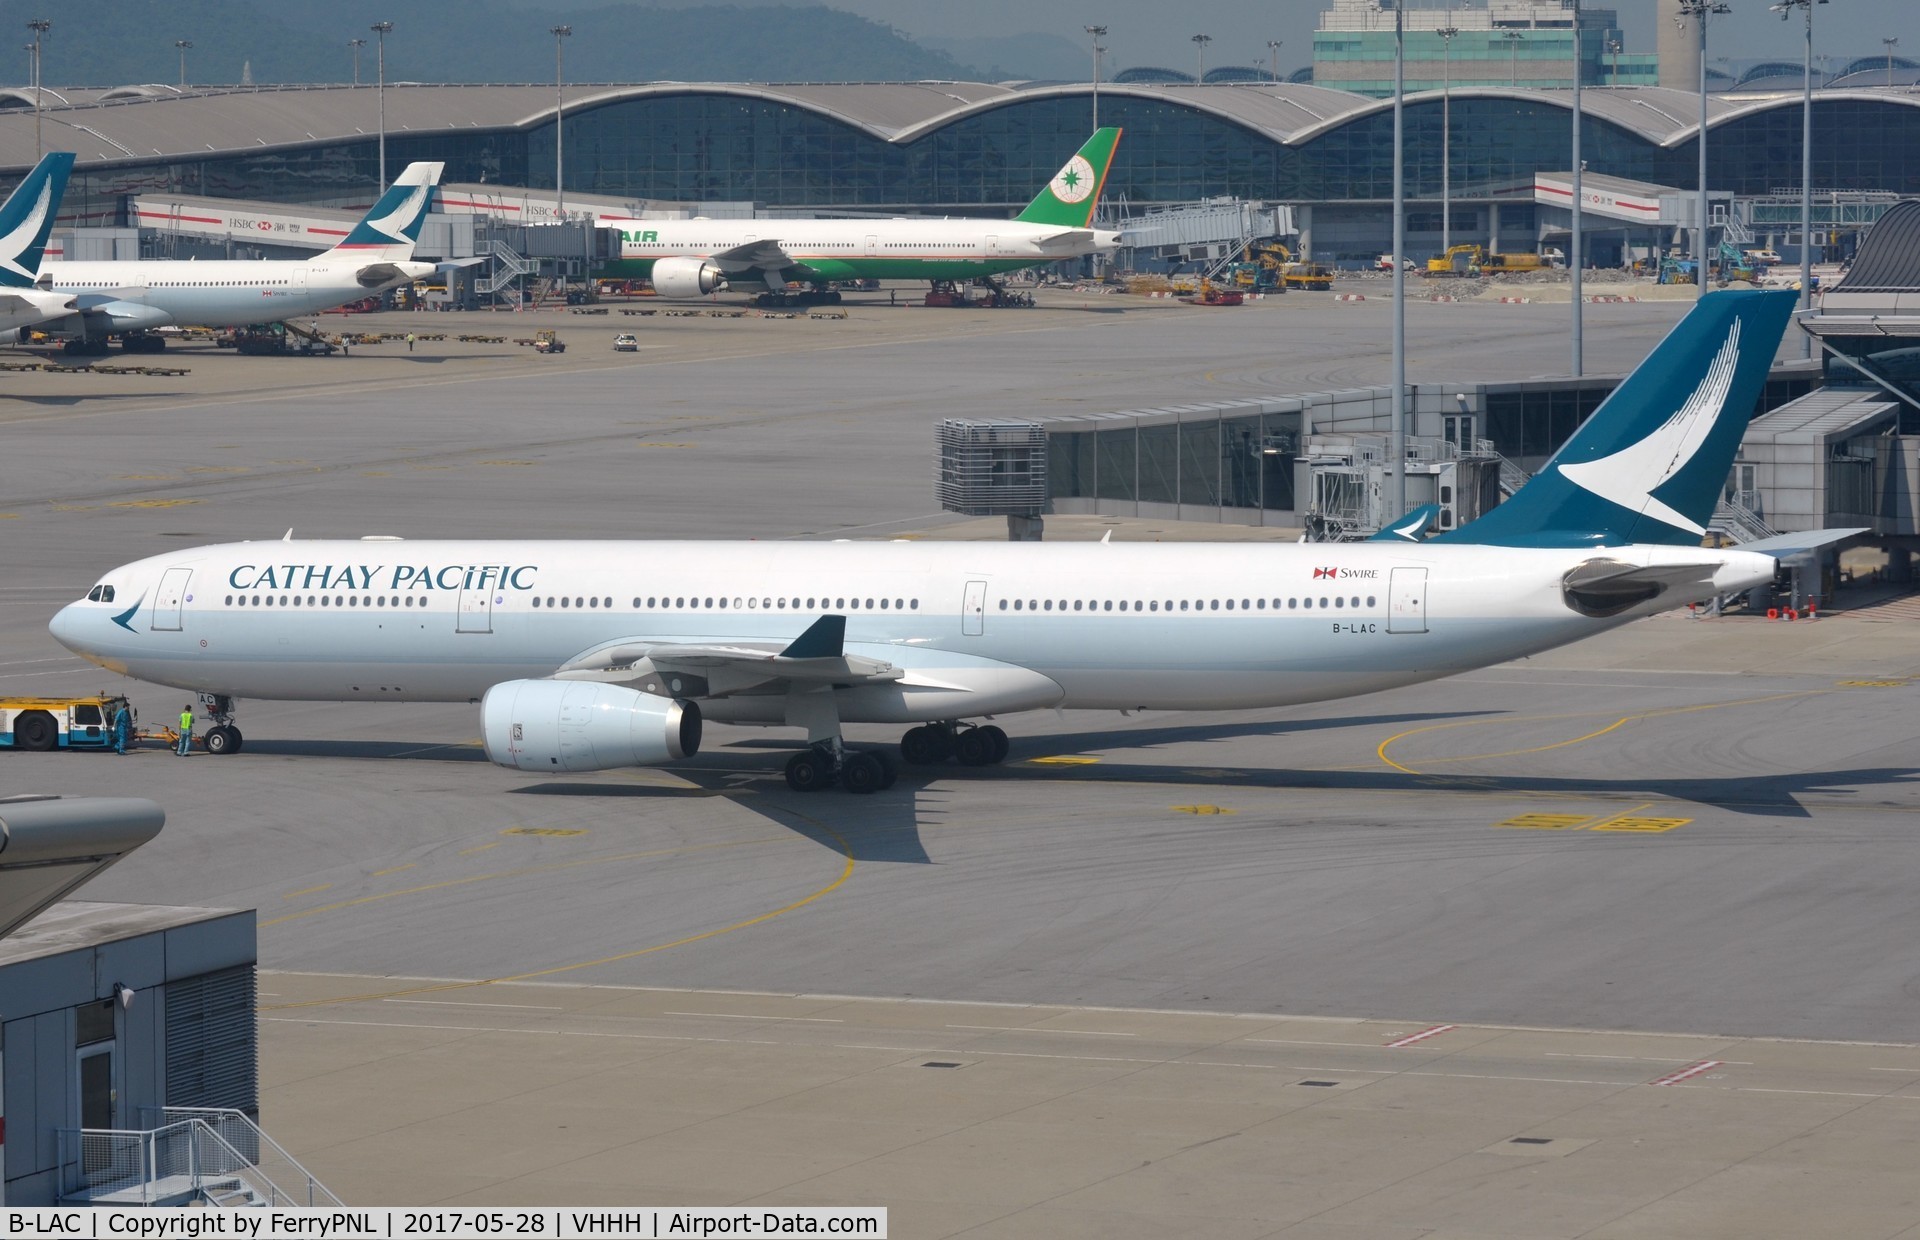 B-LAC, 2005 Airbus A330-343 C/N 679, Cathay A333 in newly revised livery.